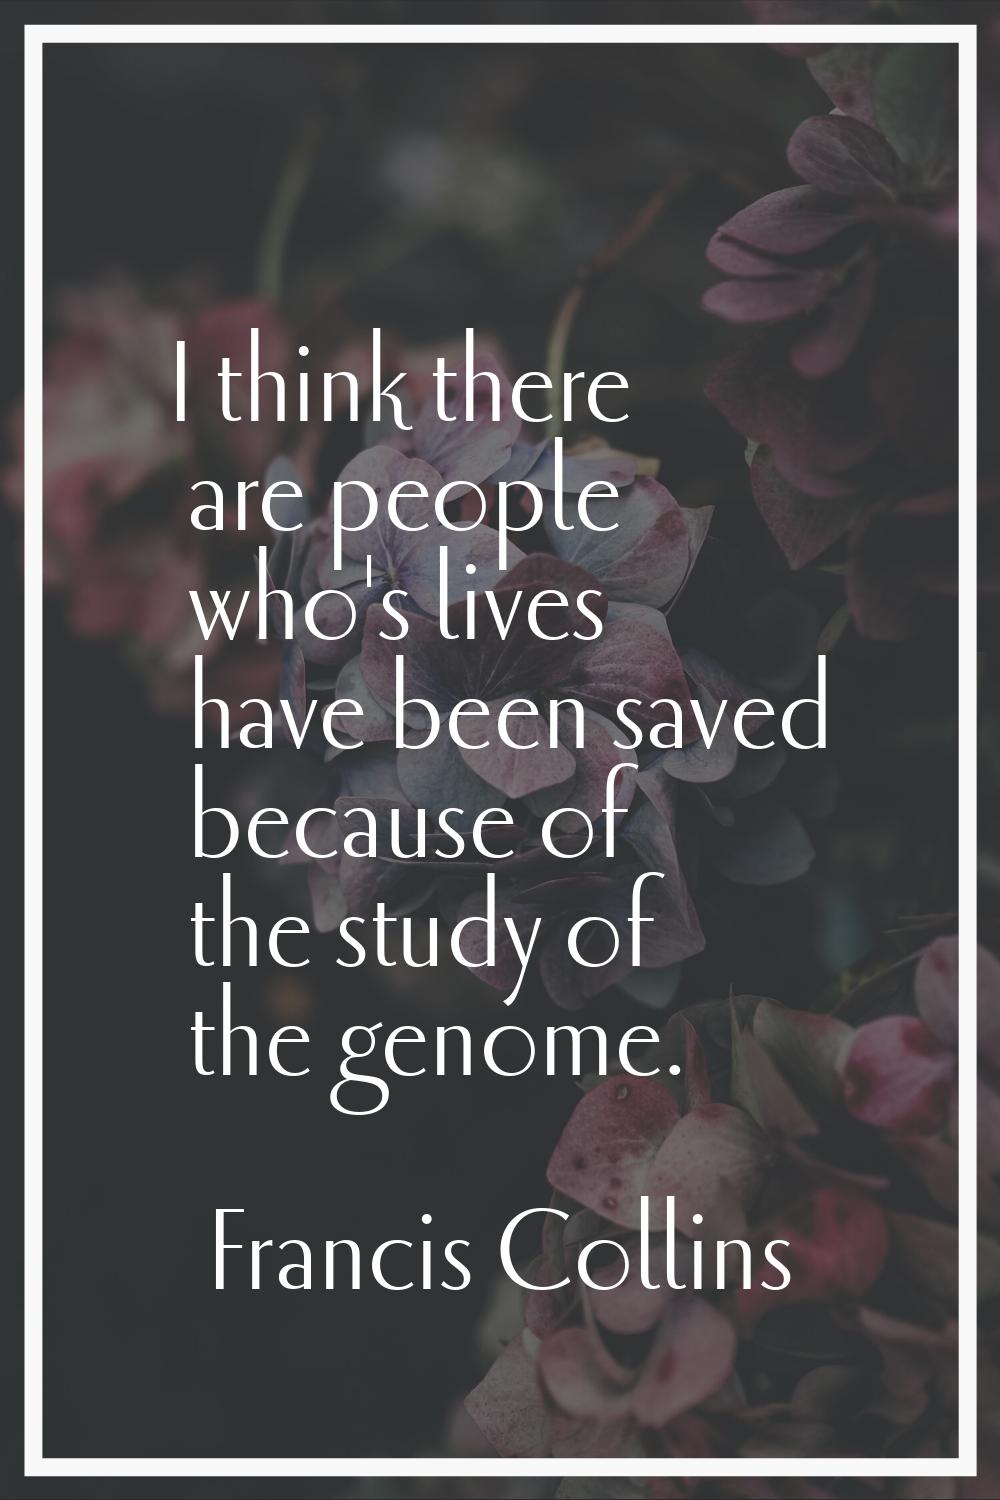 I think there are people who's lives have been saved because of the study of the genome.